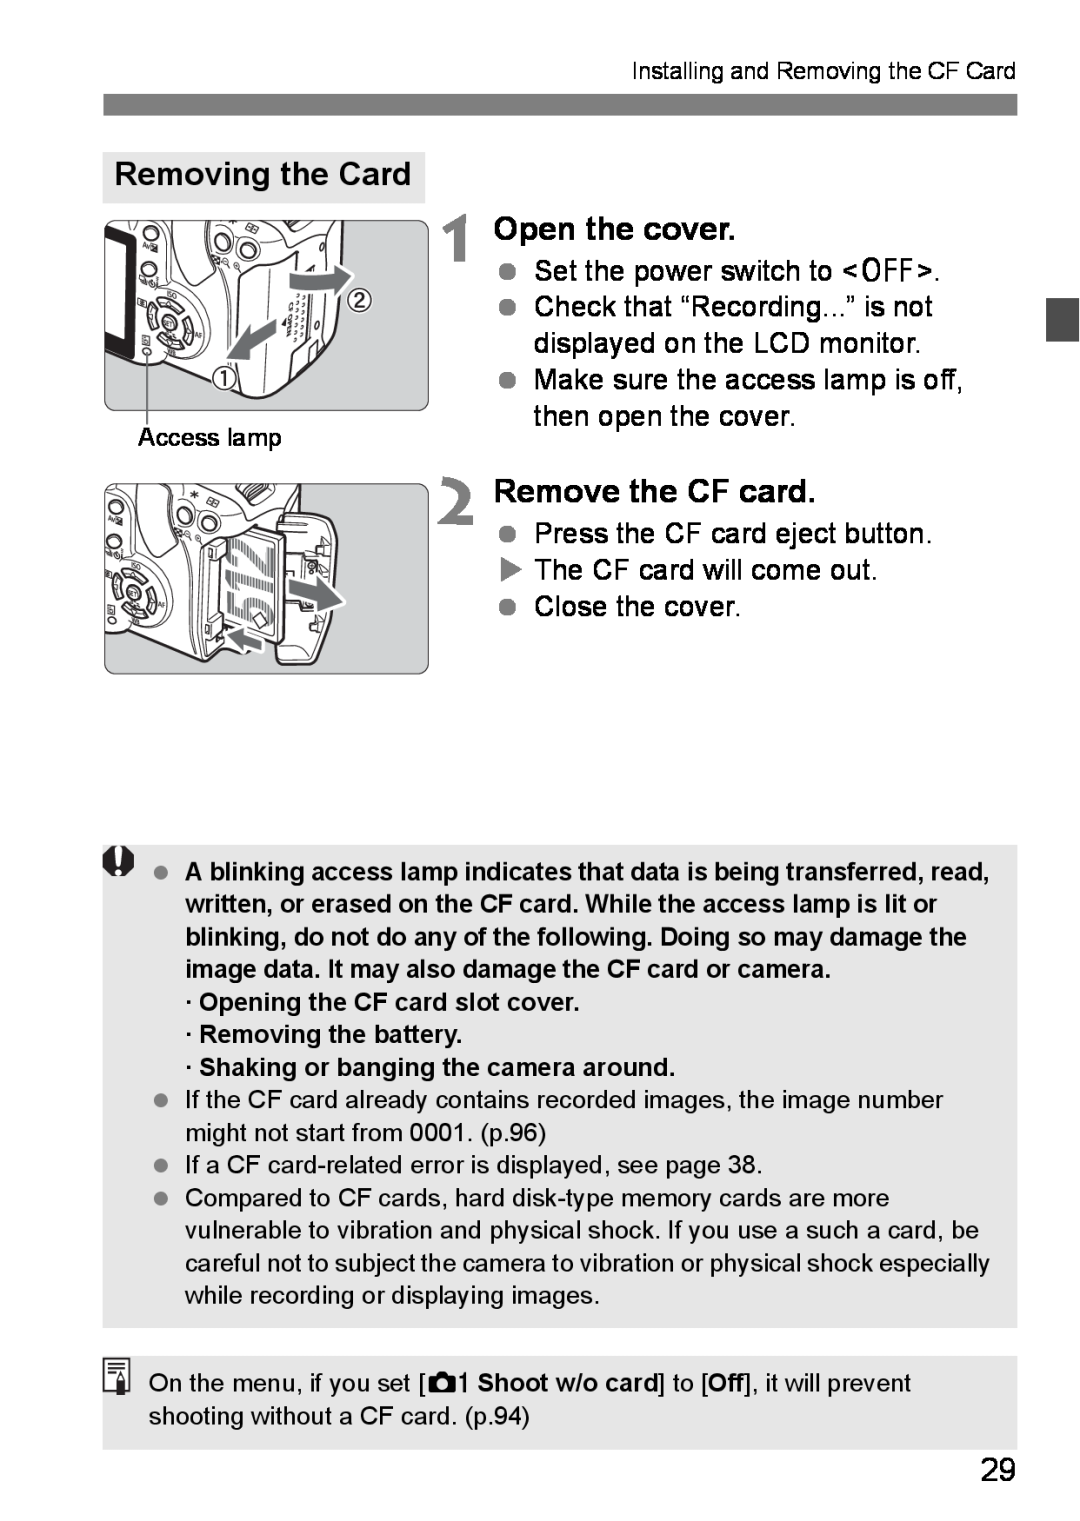 Canon EOS DIGITAL REBEL XTI instruction manual Removing the Card 1 Open the cover, Remove the CF card, Close the cover 